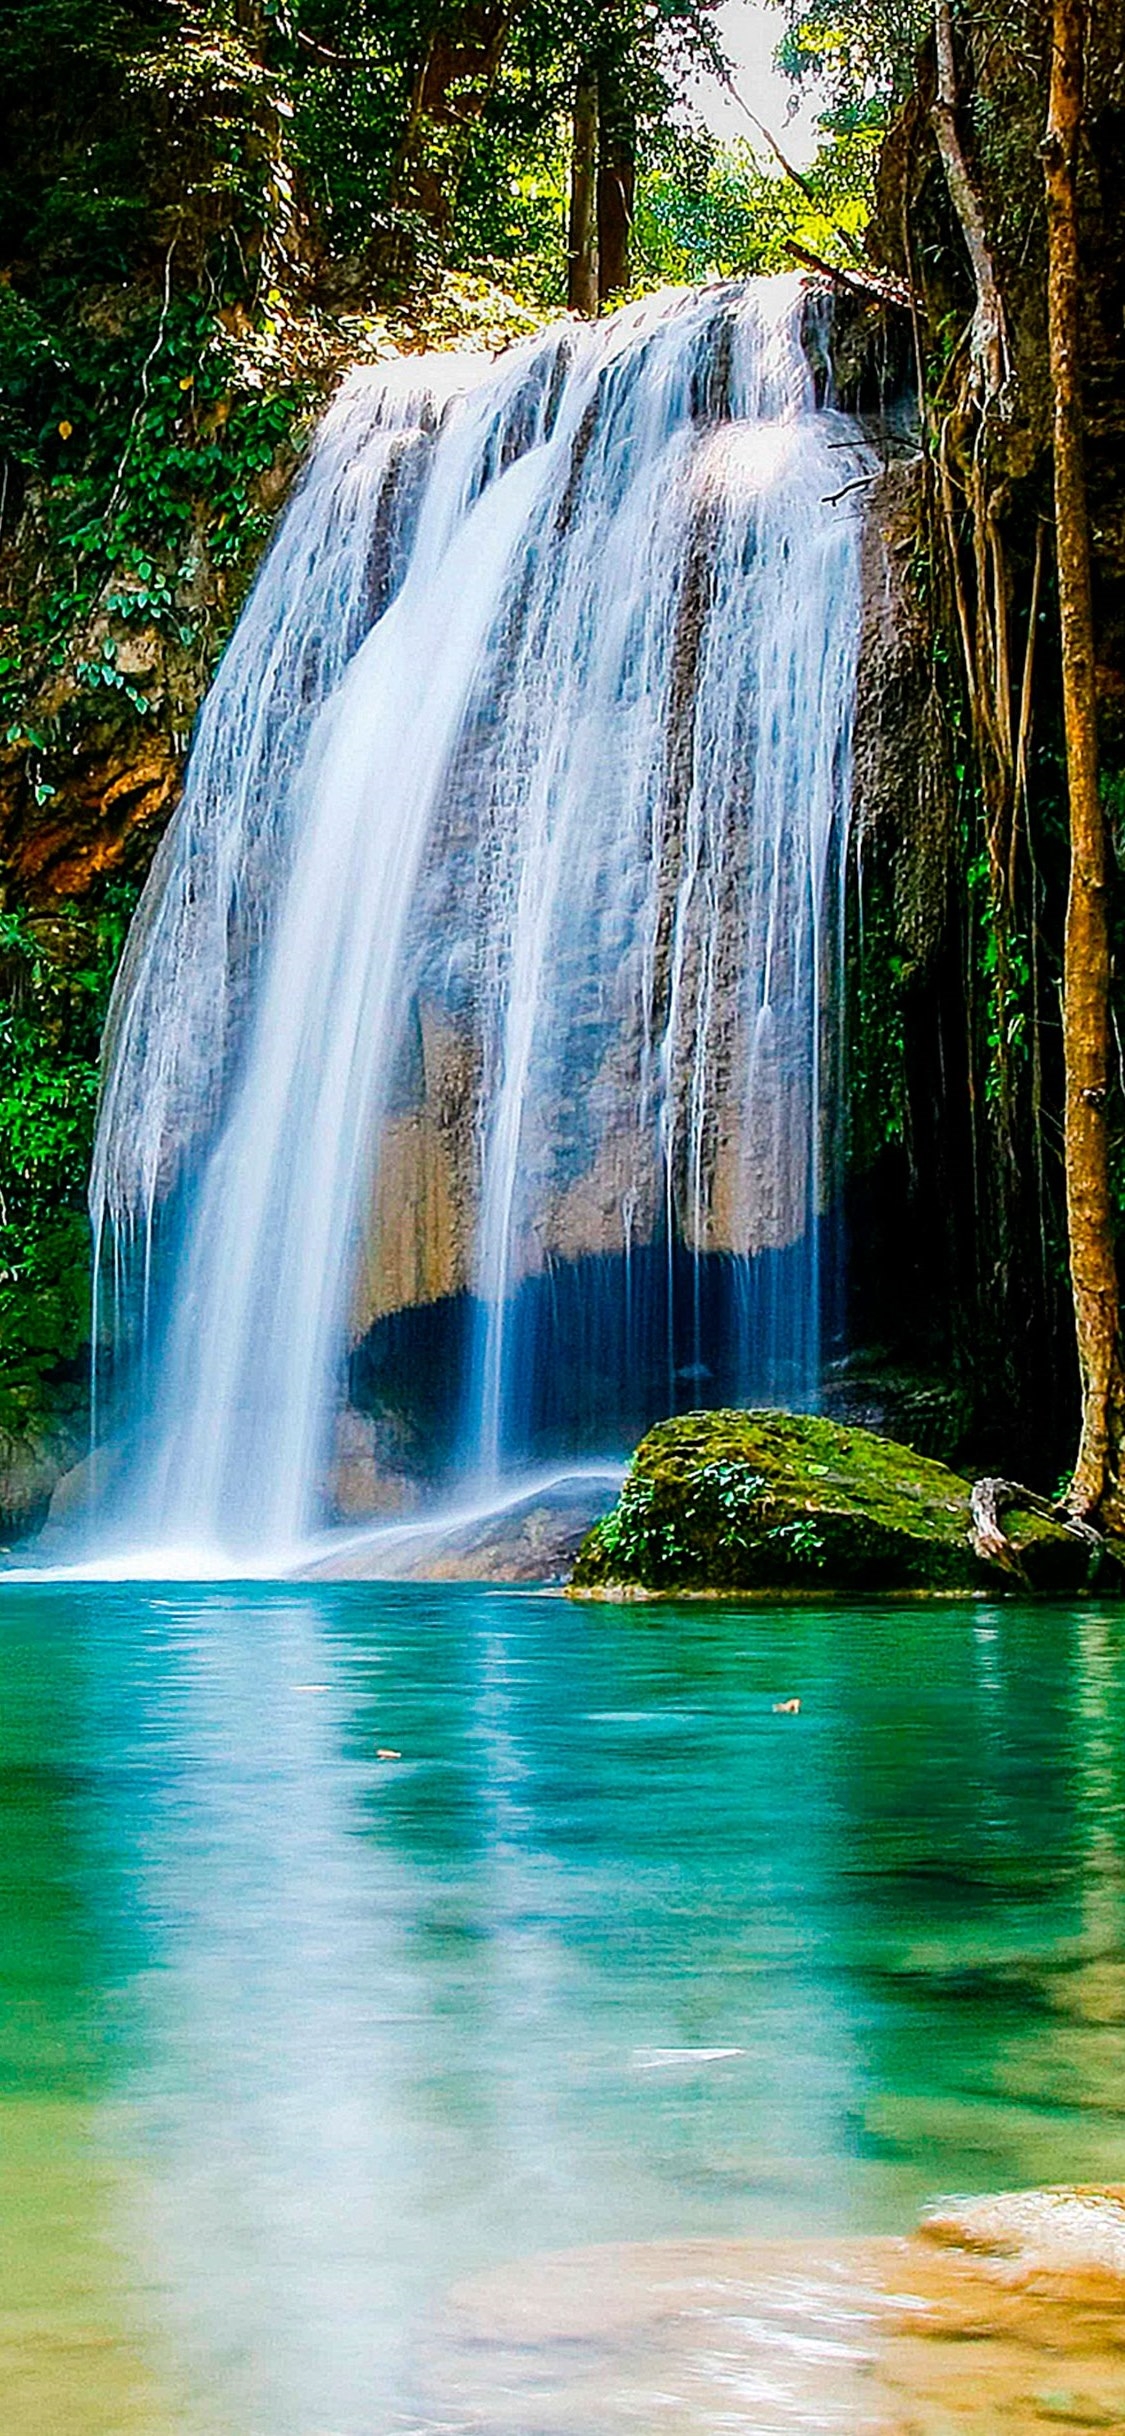 Iphone Waterfall Wallpapers